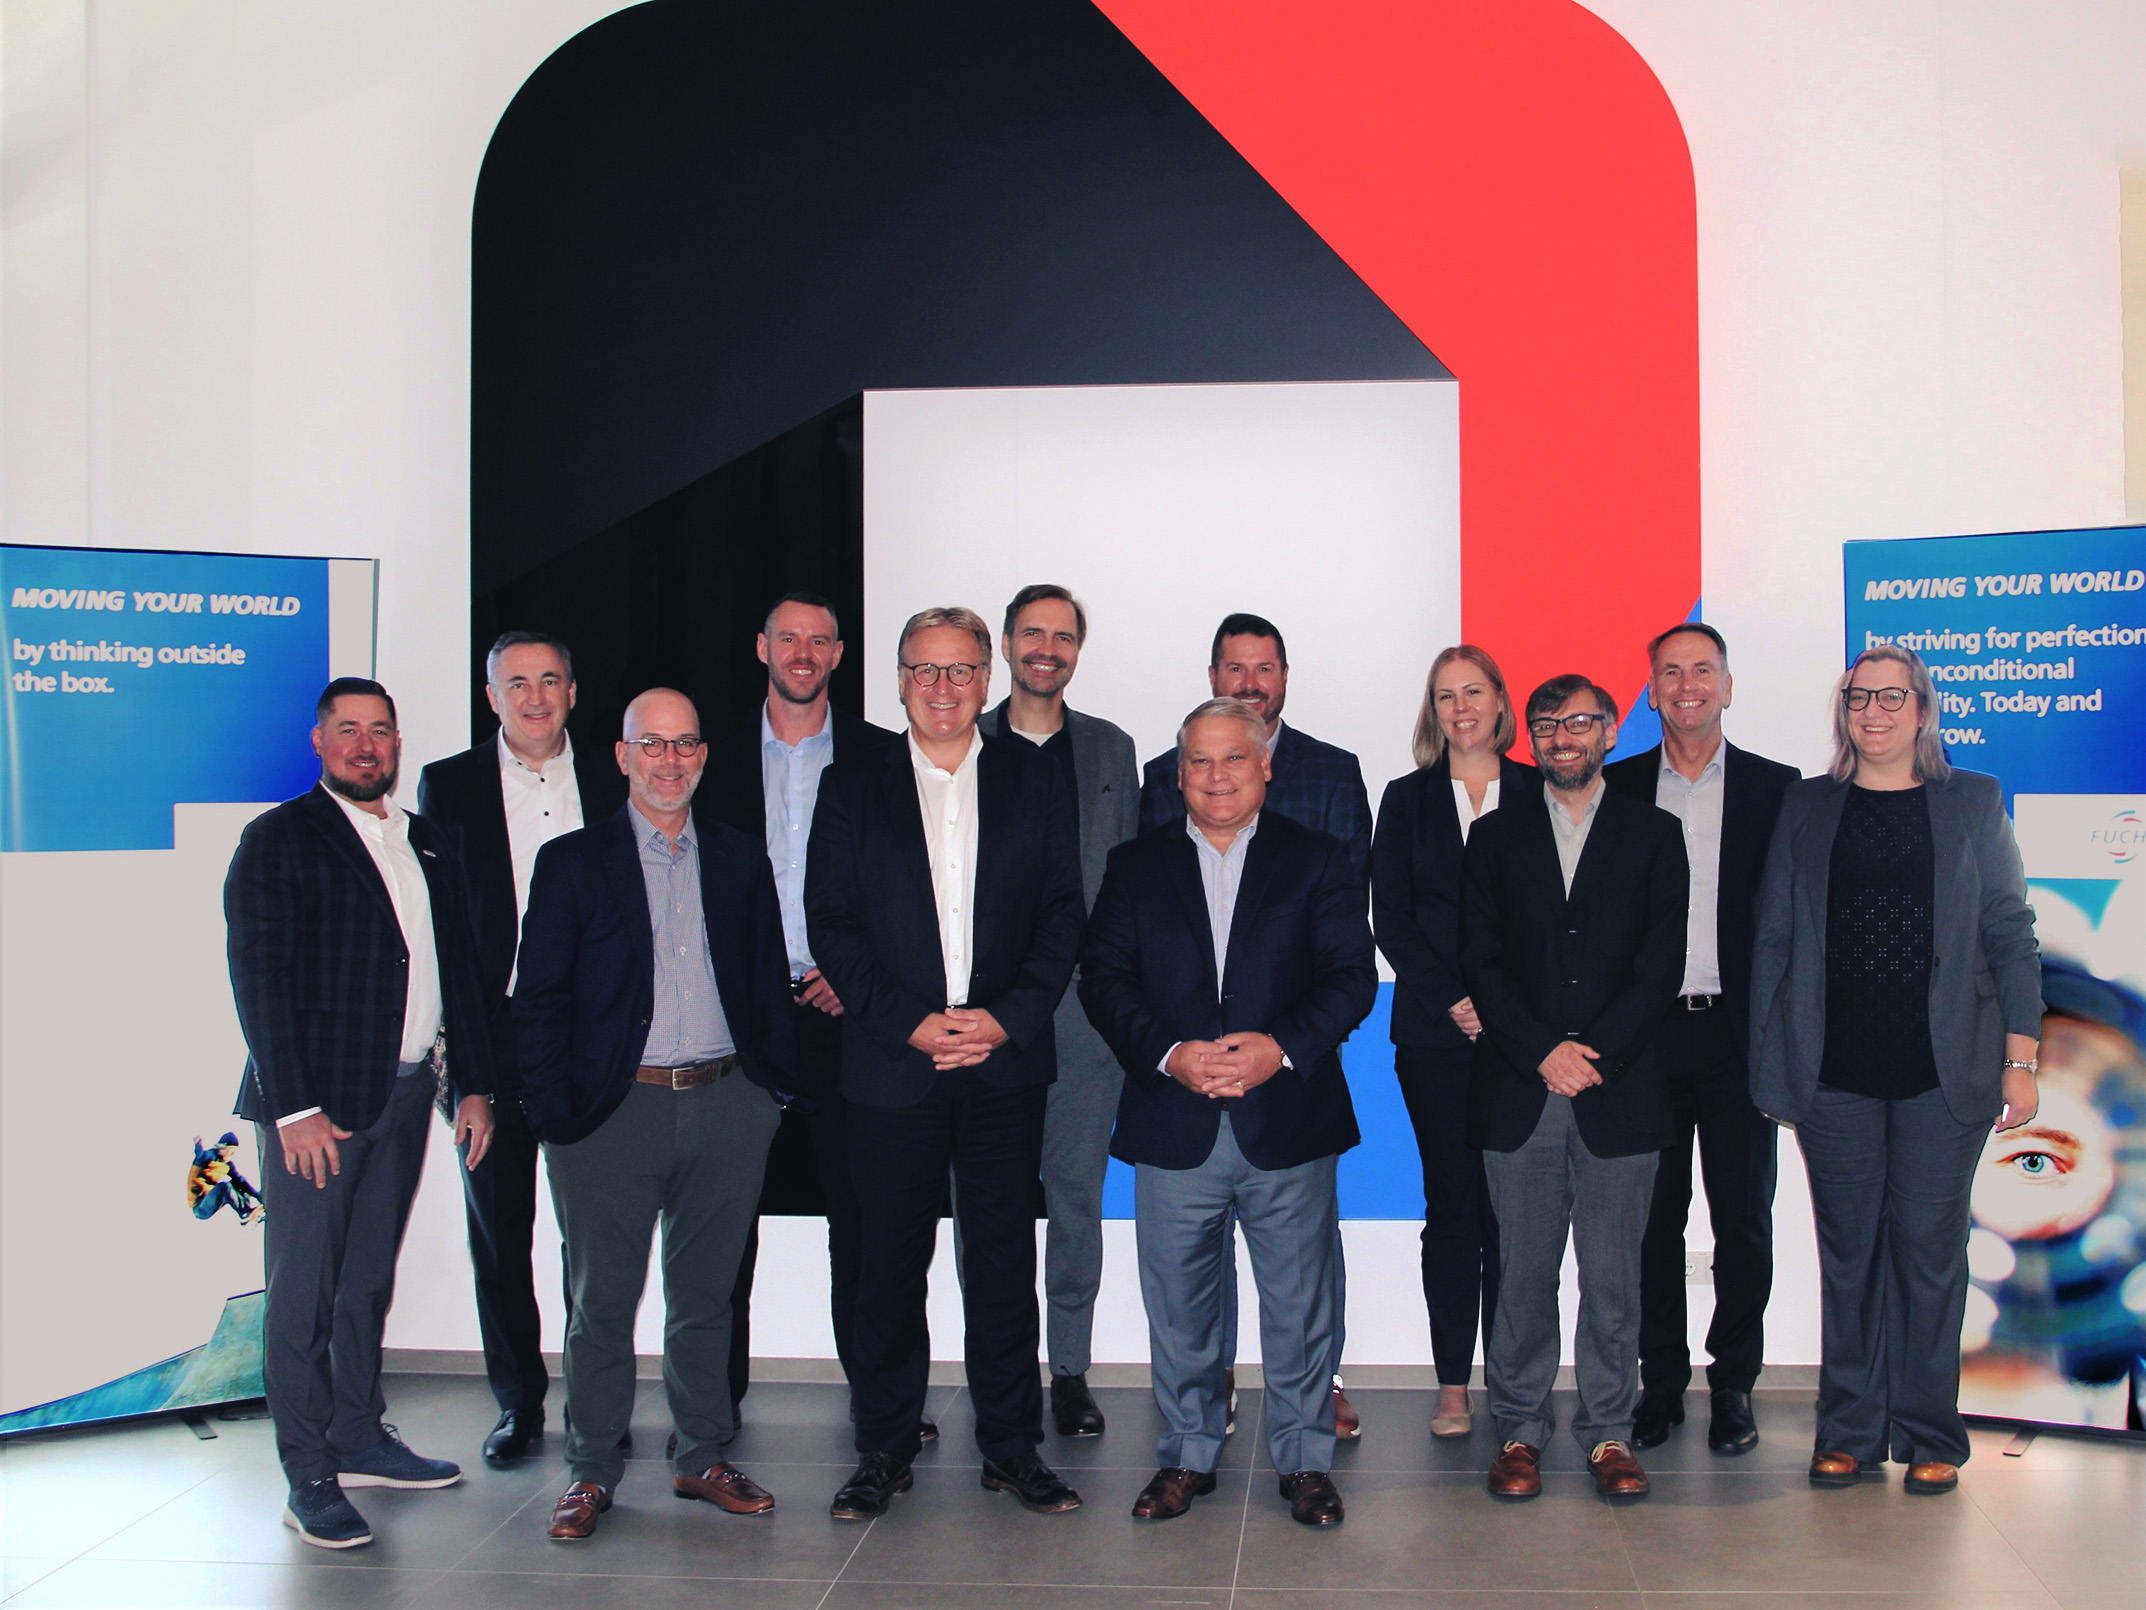 Stefan Fuchs – Chairman of the Executive Board of FUCHS SE, and John Kasel – President and CEO, L.B. Foster Company alongside their management teams at the FUCHS main office in Mannheim, Germany